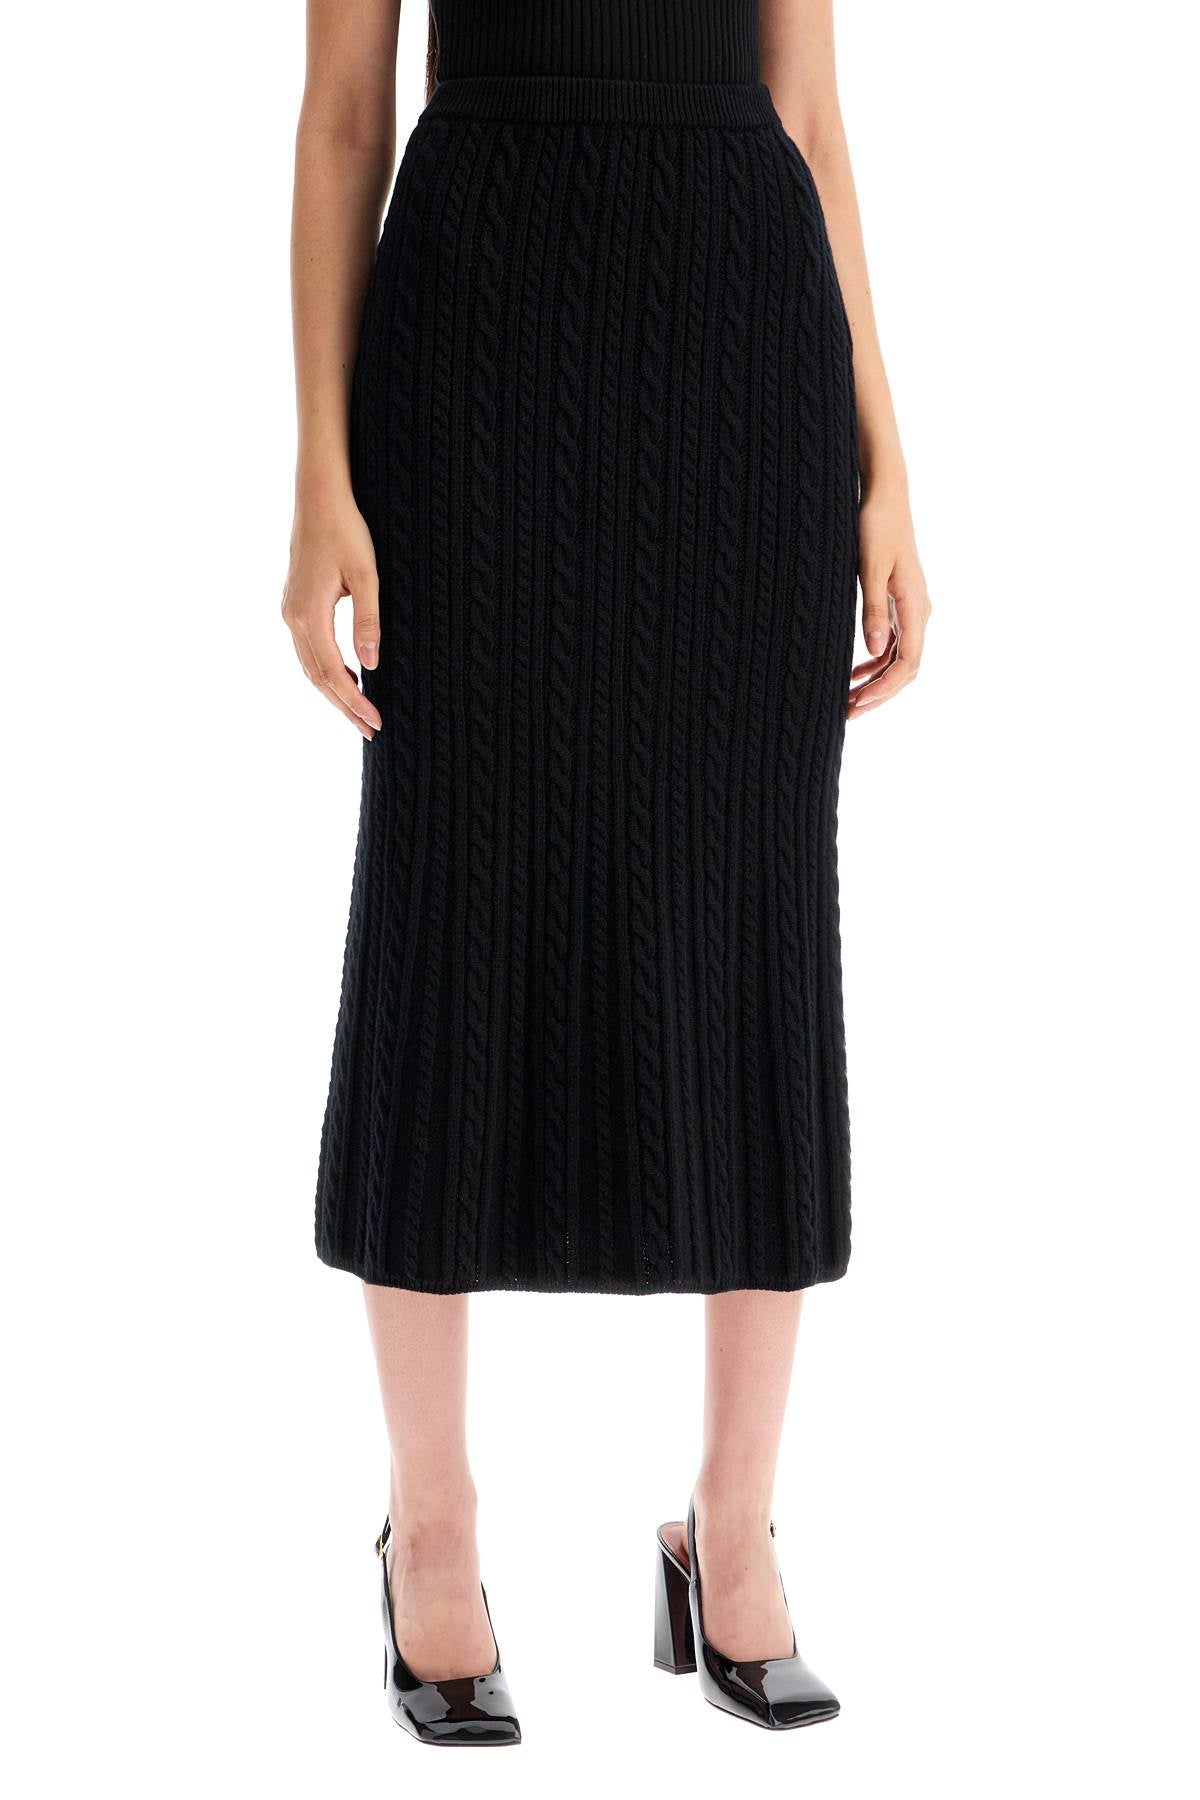 Alessandra Rich "knitted Midi Skirt With Cable Knit   Black